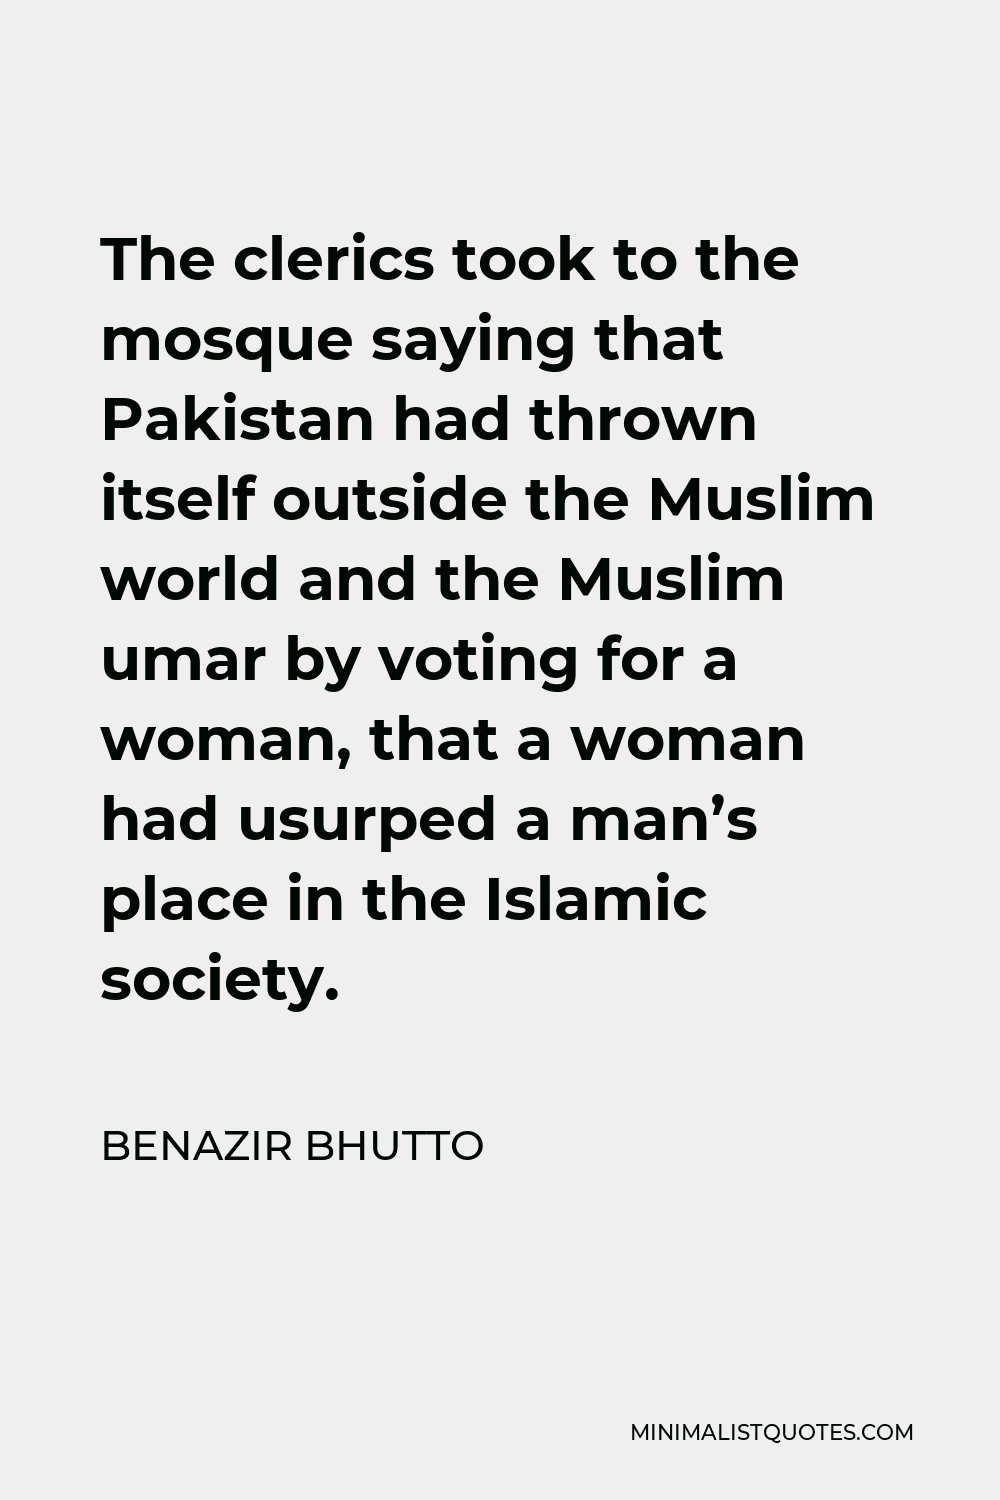 Benazir Bhutto Quote - The clerics took to the mosque saying that Pakistan had thrown itself outside the Muslim world and the Muslim umar by voting for a woman, that a woman had usurped a man’s place in the Islamic society.